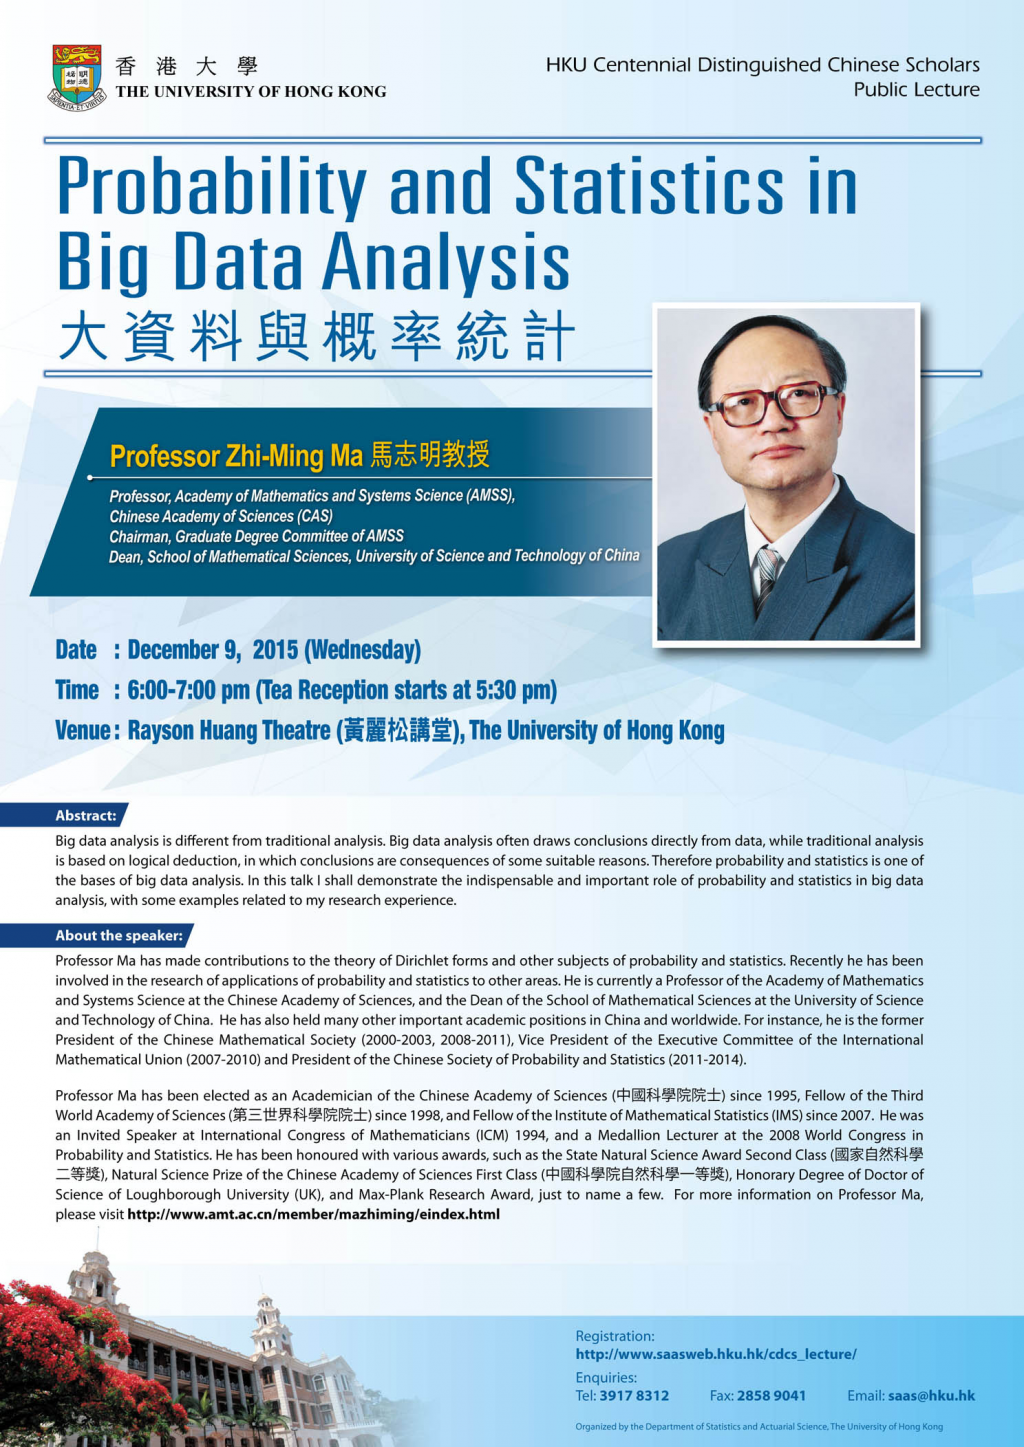 HKU Centennial Distinguished Chinese Scholars Public Lecture on 'Probability and Statistics in Big Data Analysis 大資料與概率統計'